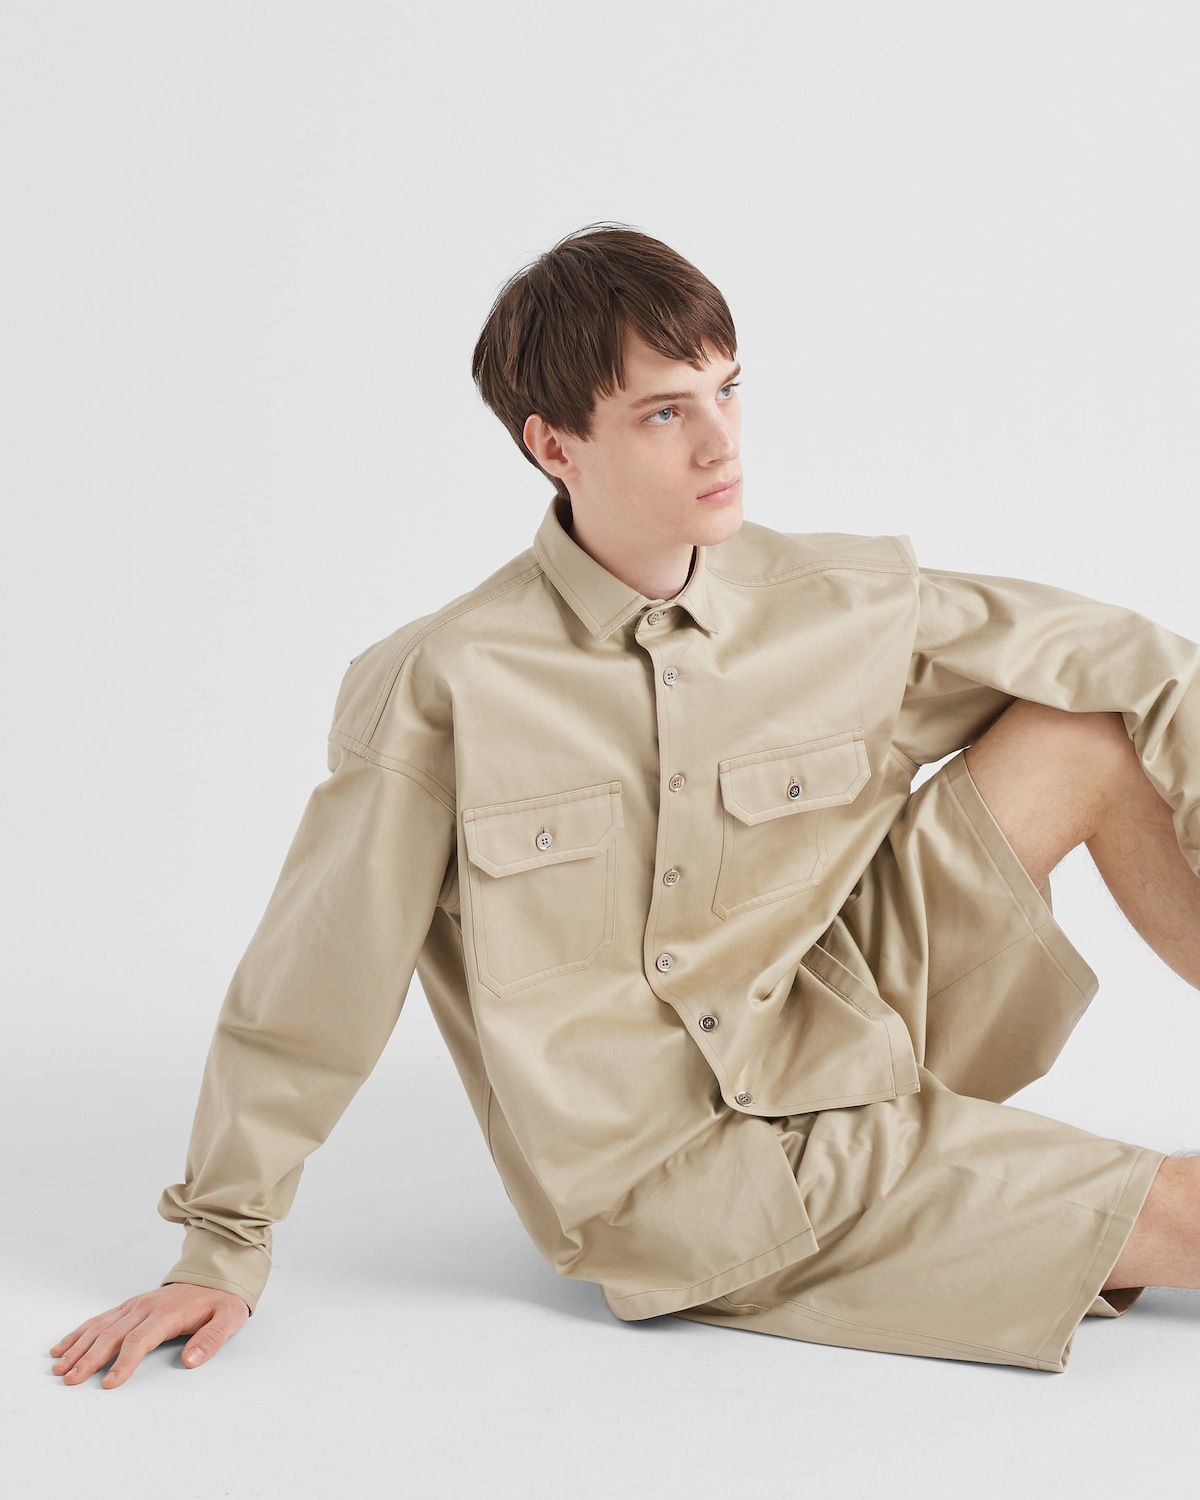 PRADA Beige Chino Shirt for Men - SS24 Collection